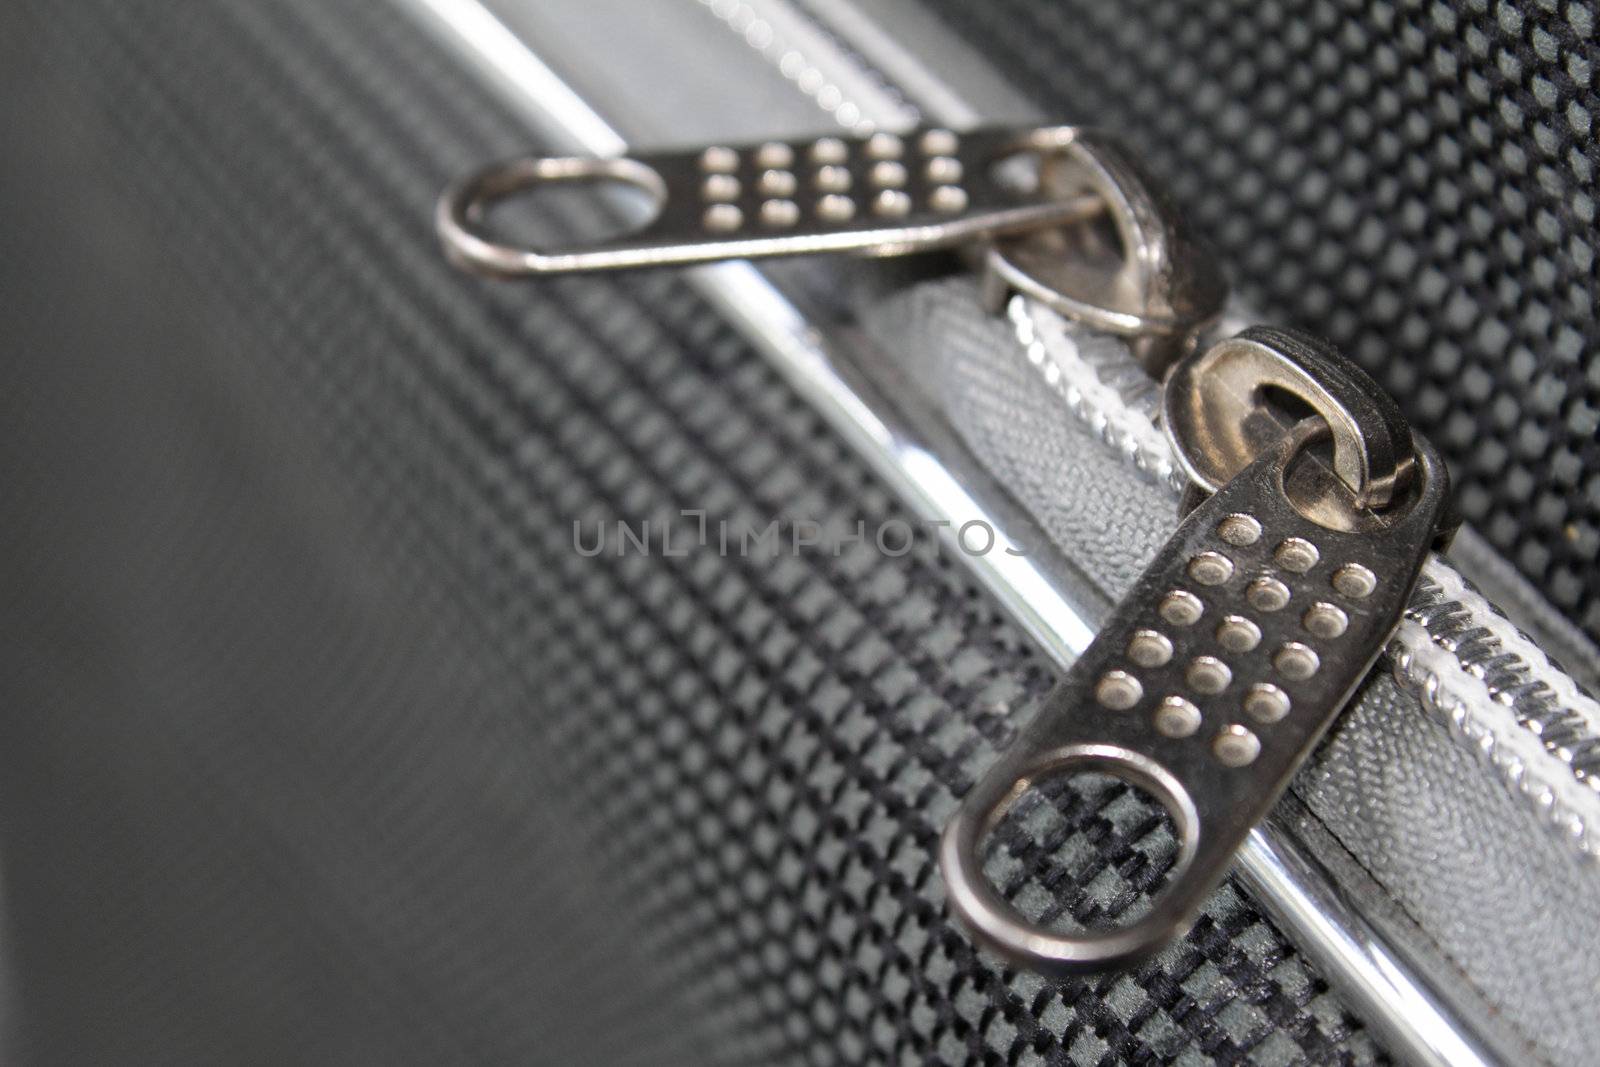 Two zipper clasps on the grayish suitcase